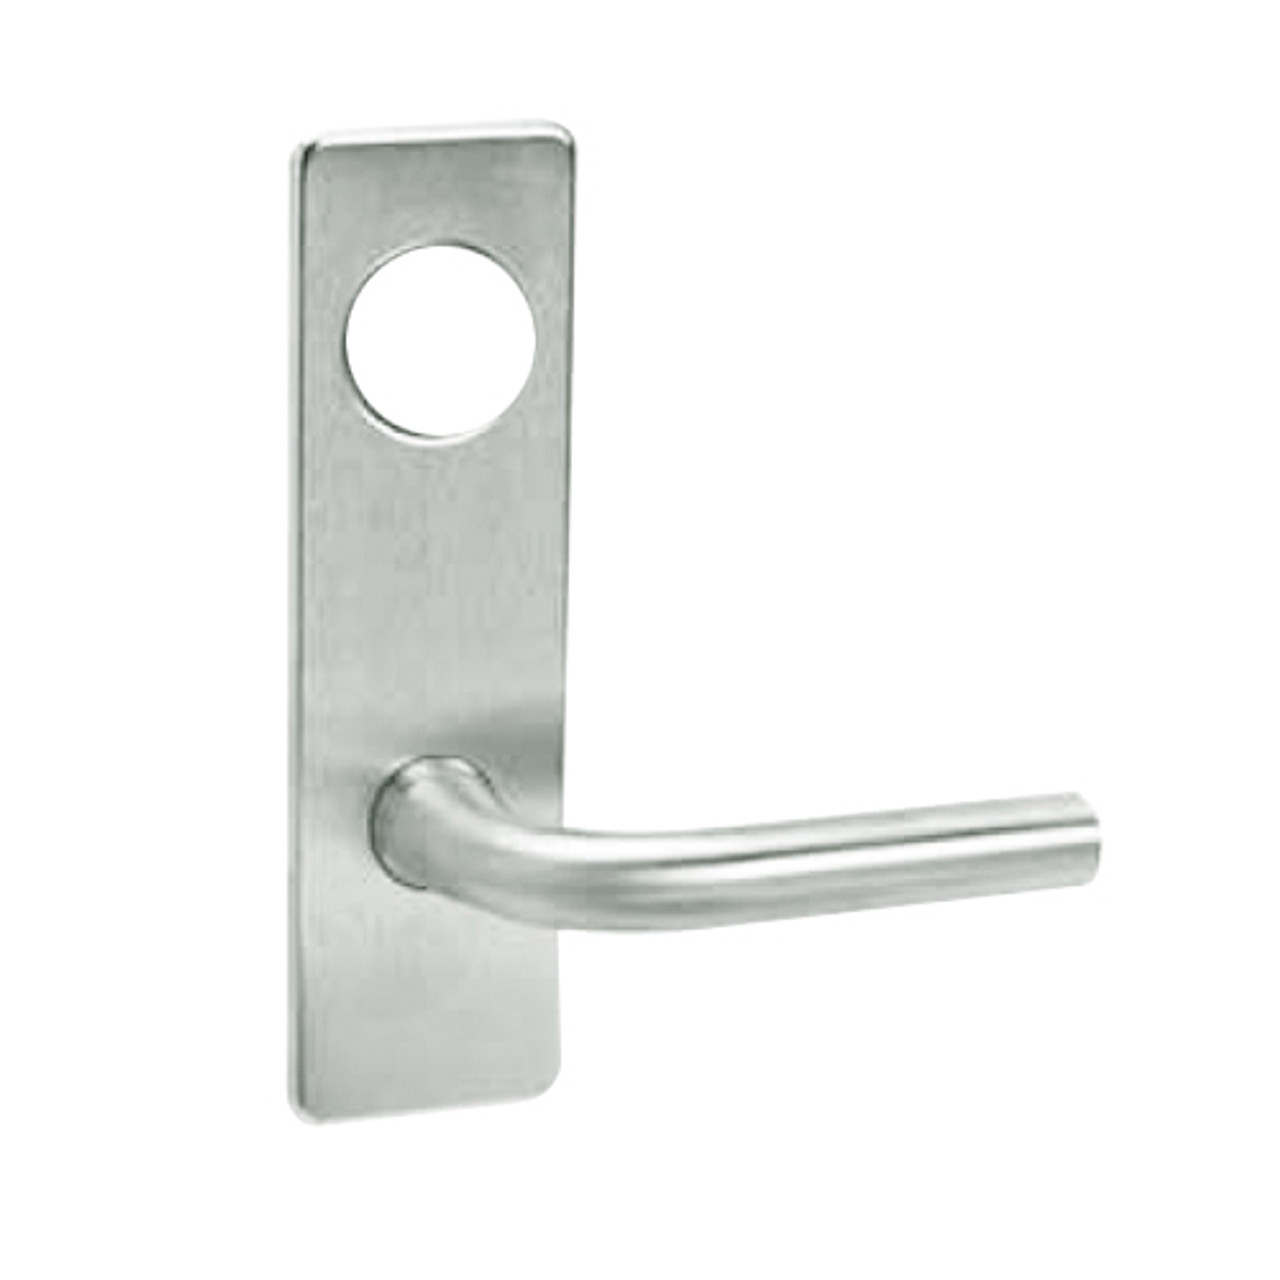 ML2051-RSM-618-CL7 Corbin Russwin ML2000 Series IC 7-Pin Less Core Mortise Office Locksets with Regis Lever in Bright Nickel